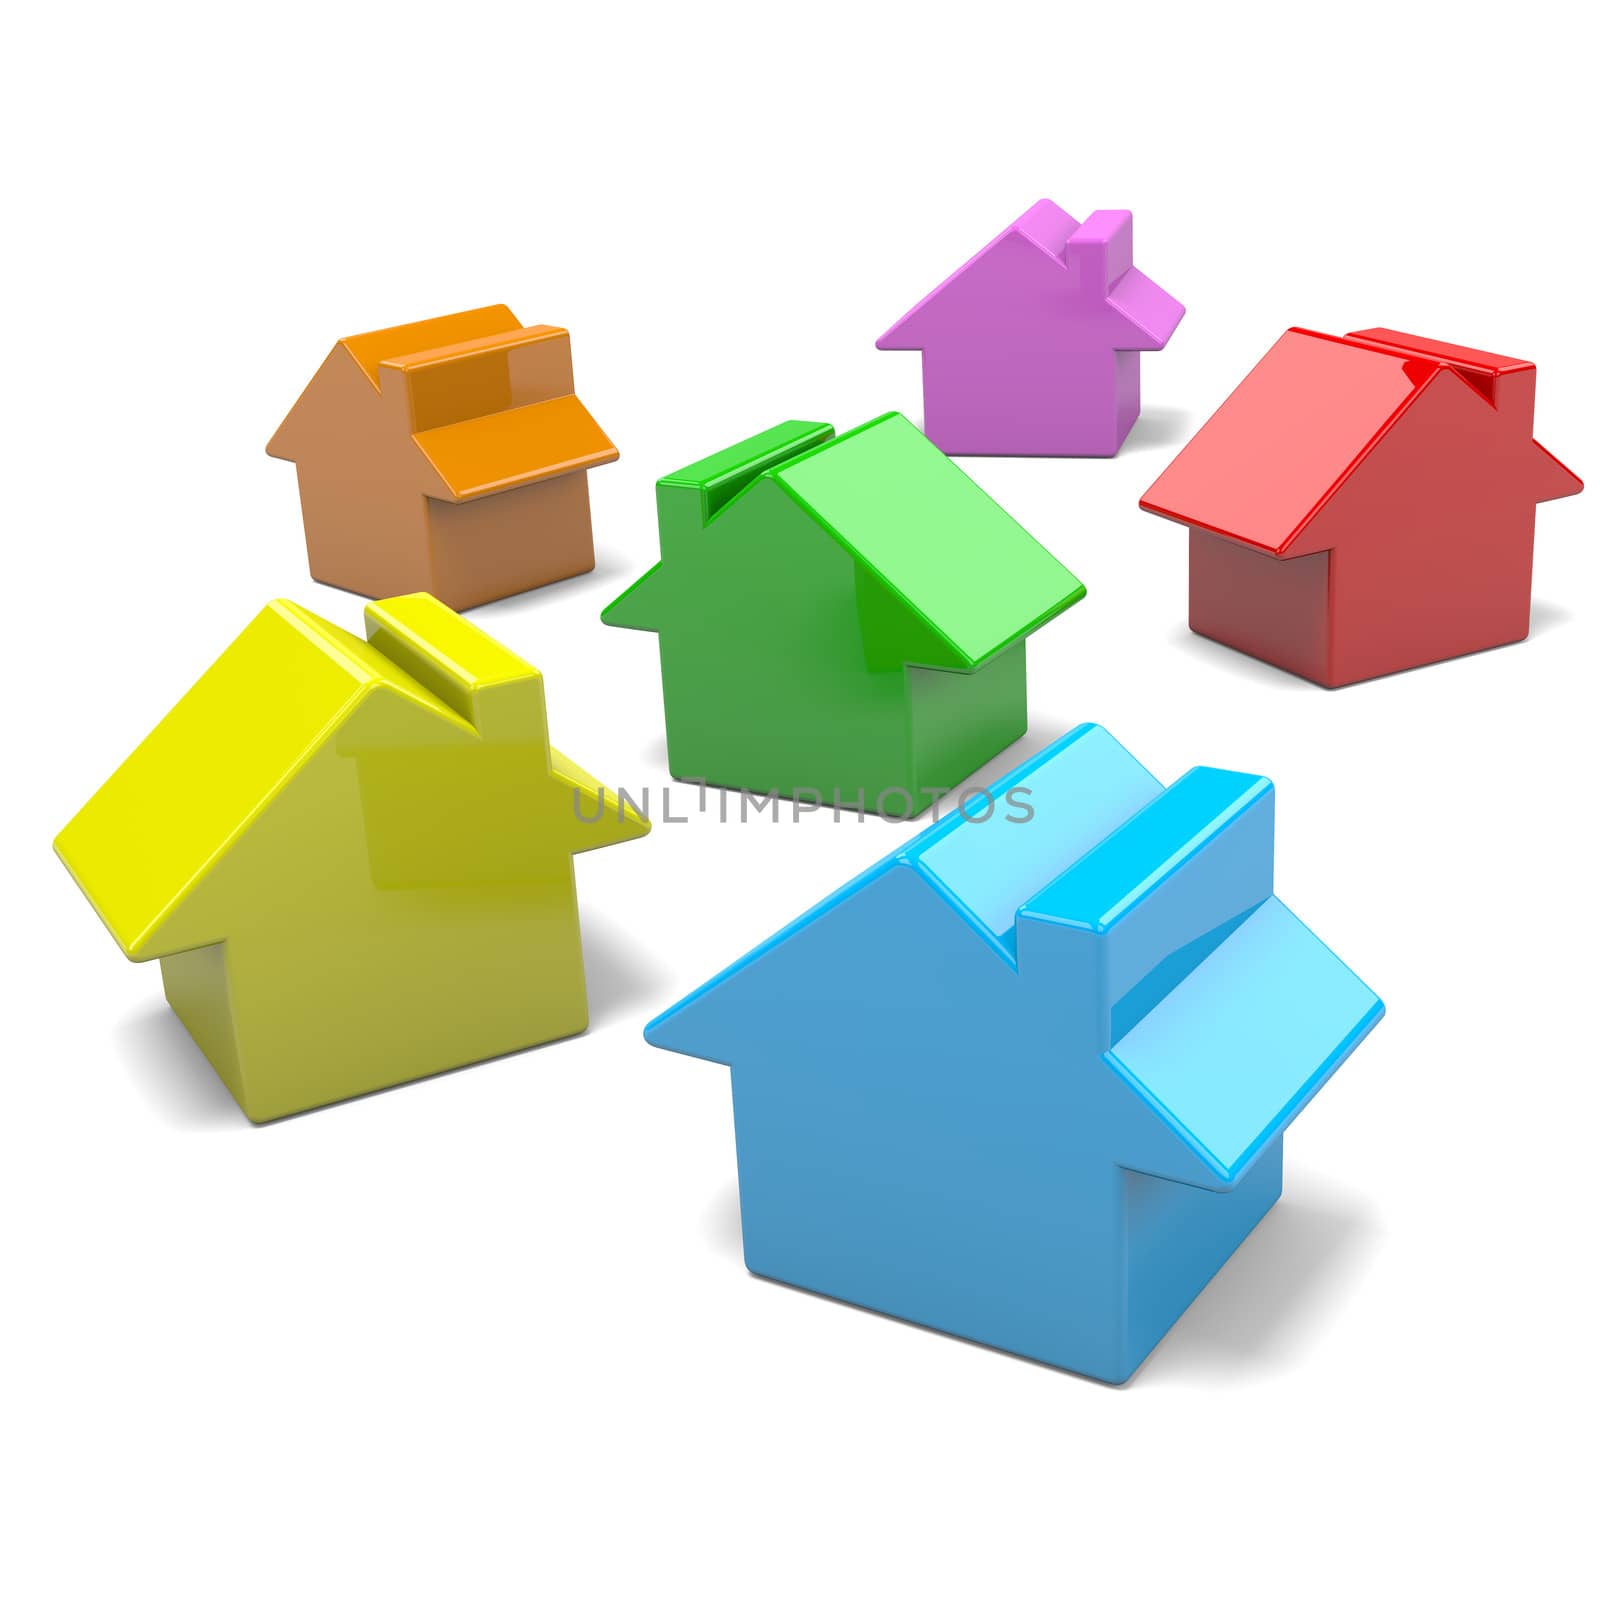 Group of Colorful Houses on White Background 3D Illustration